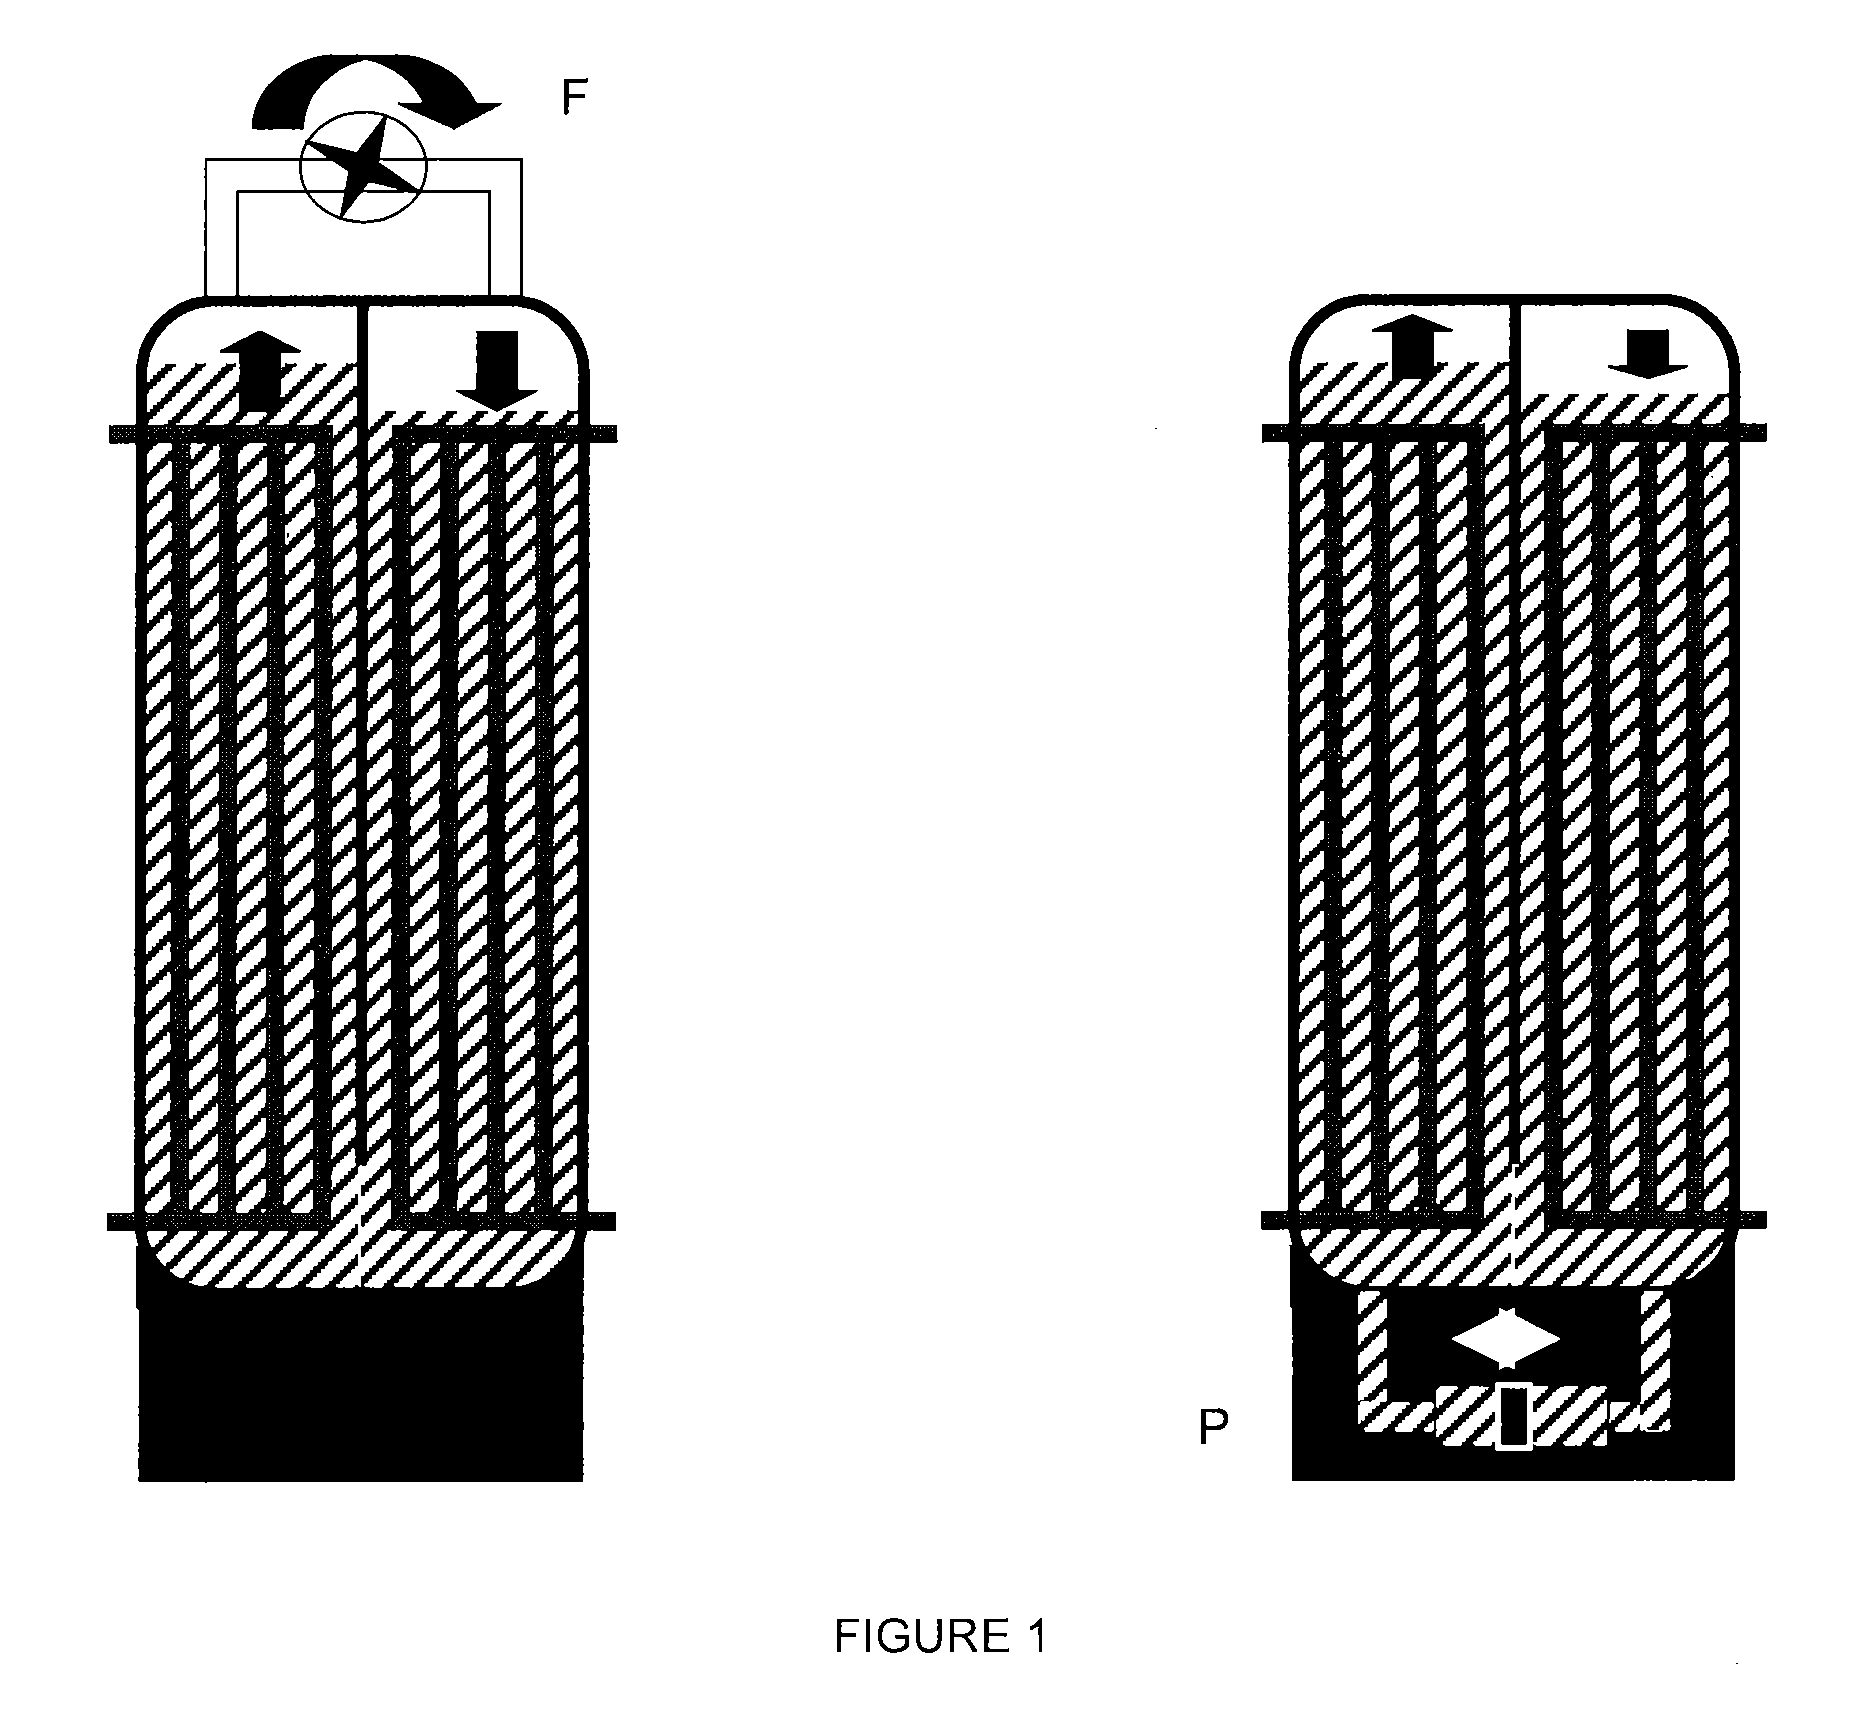 Crystallization apparatus and process for molten fats